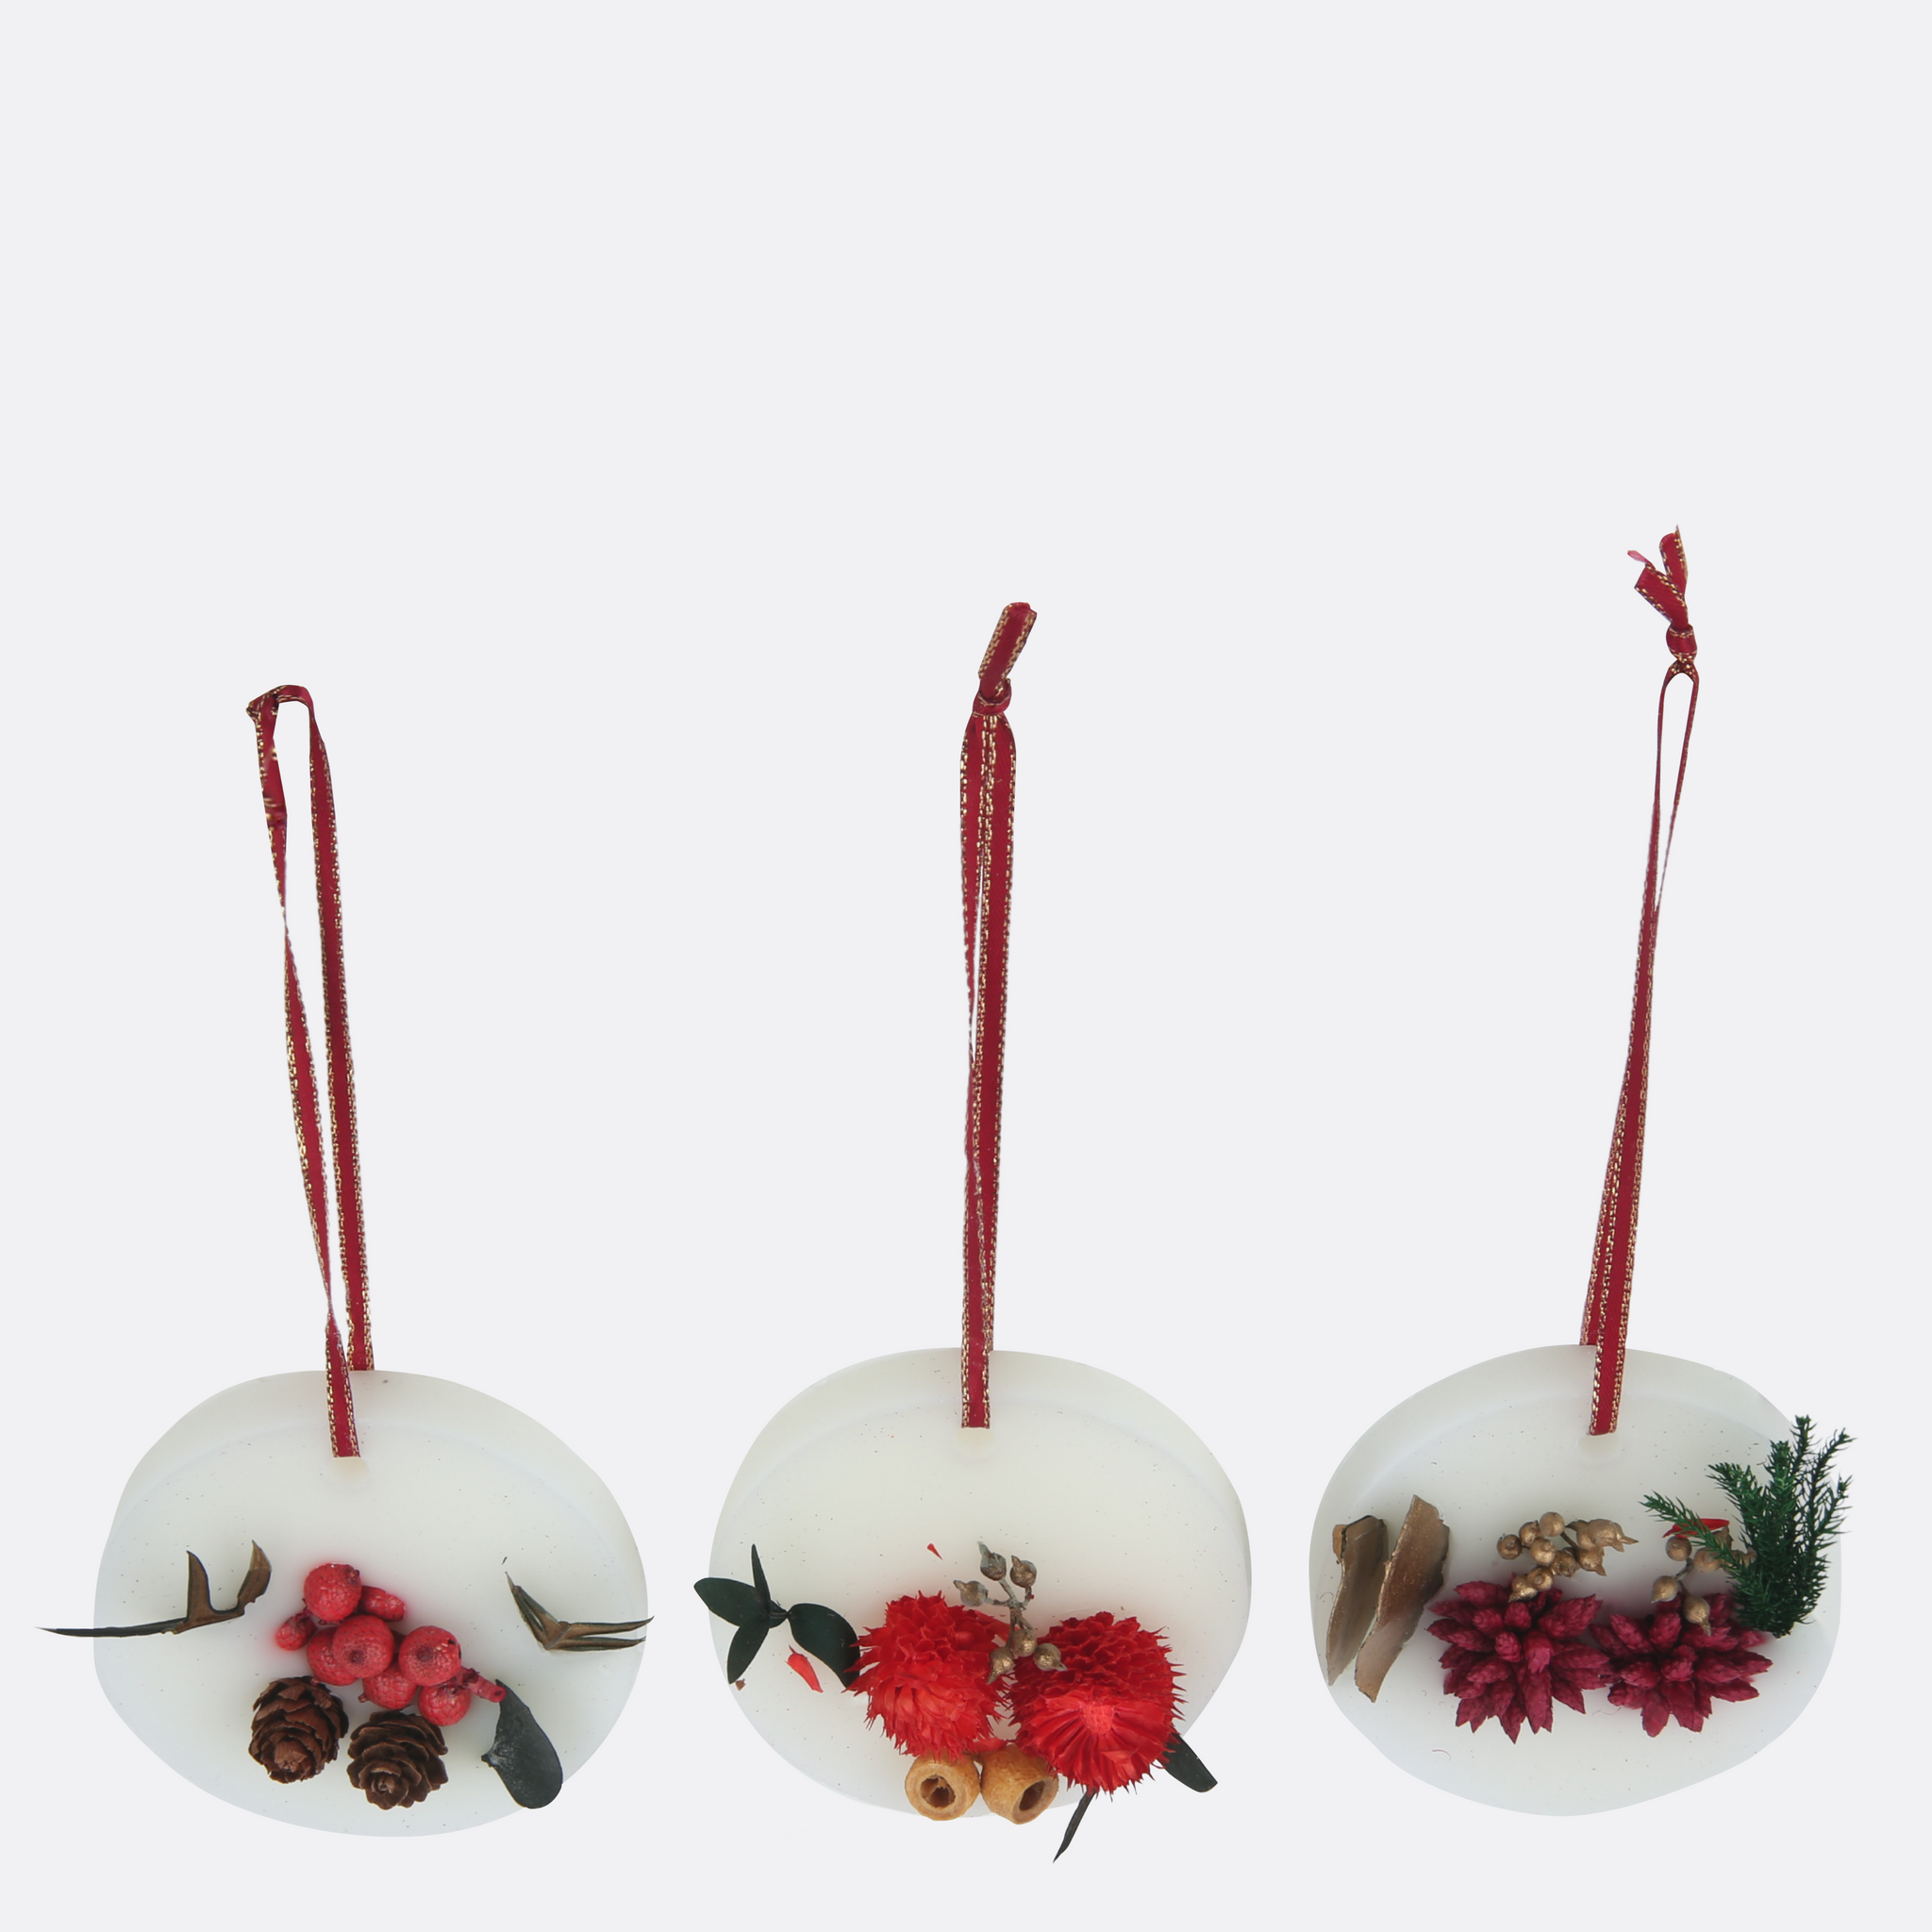 Wax Sachet Air Fresheners With Plants ( Set Of 3 )